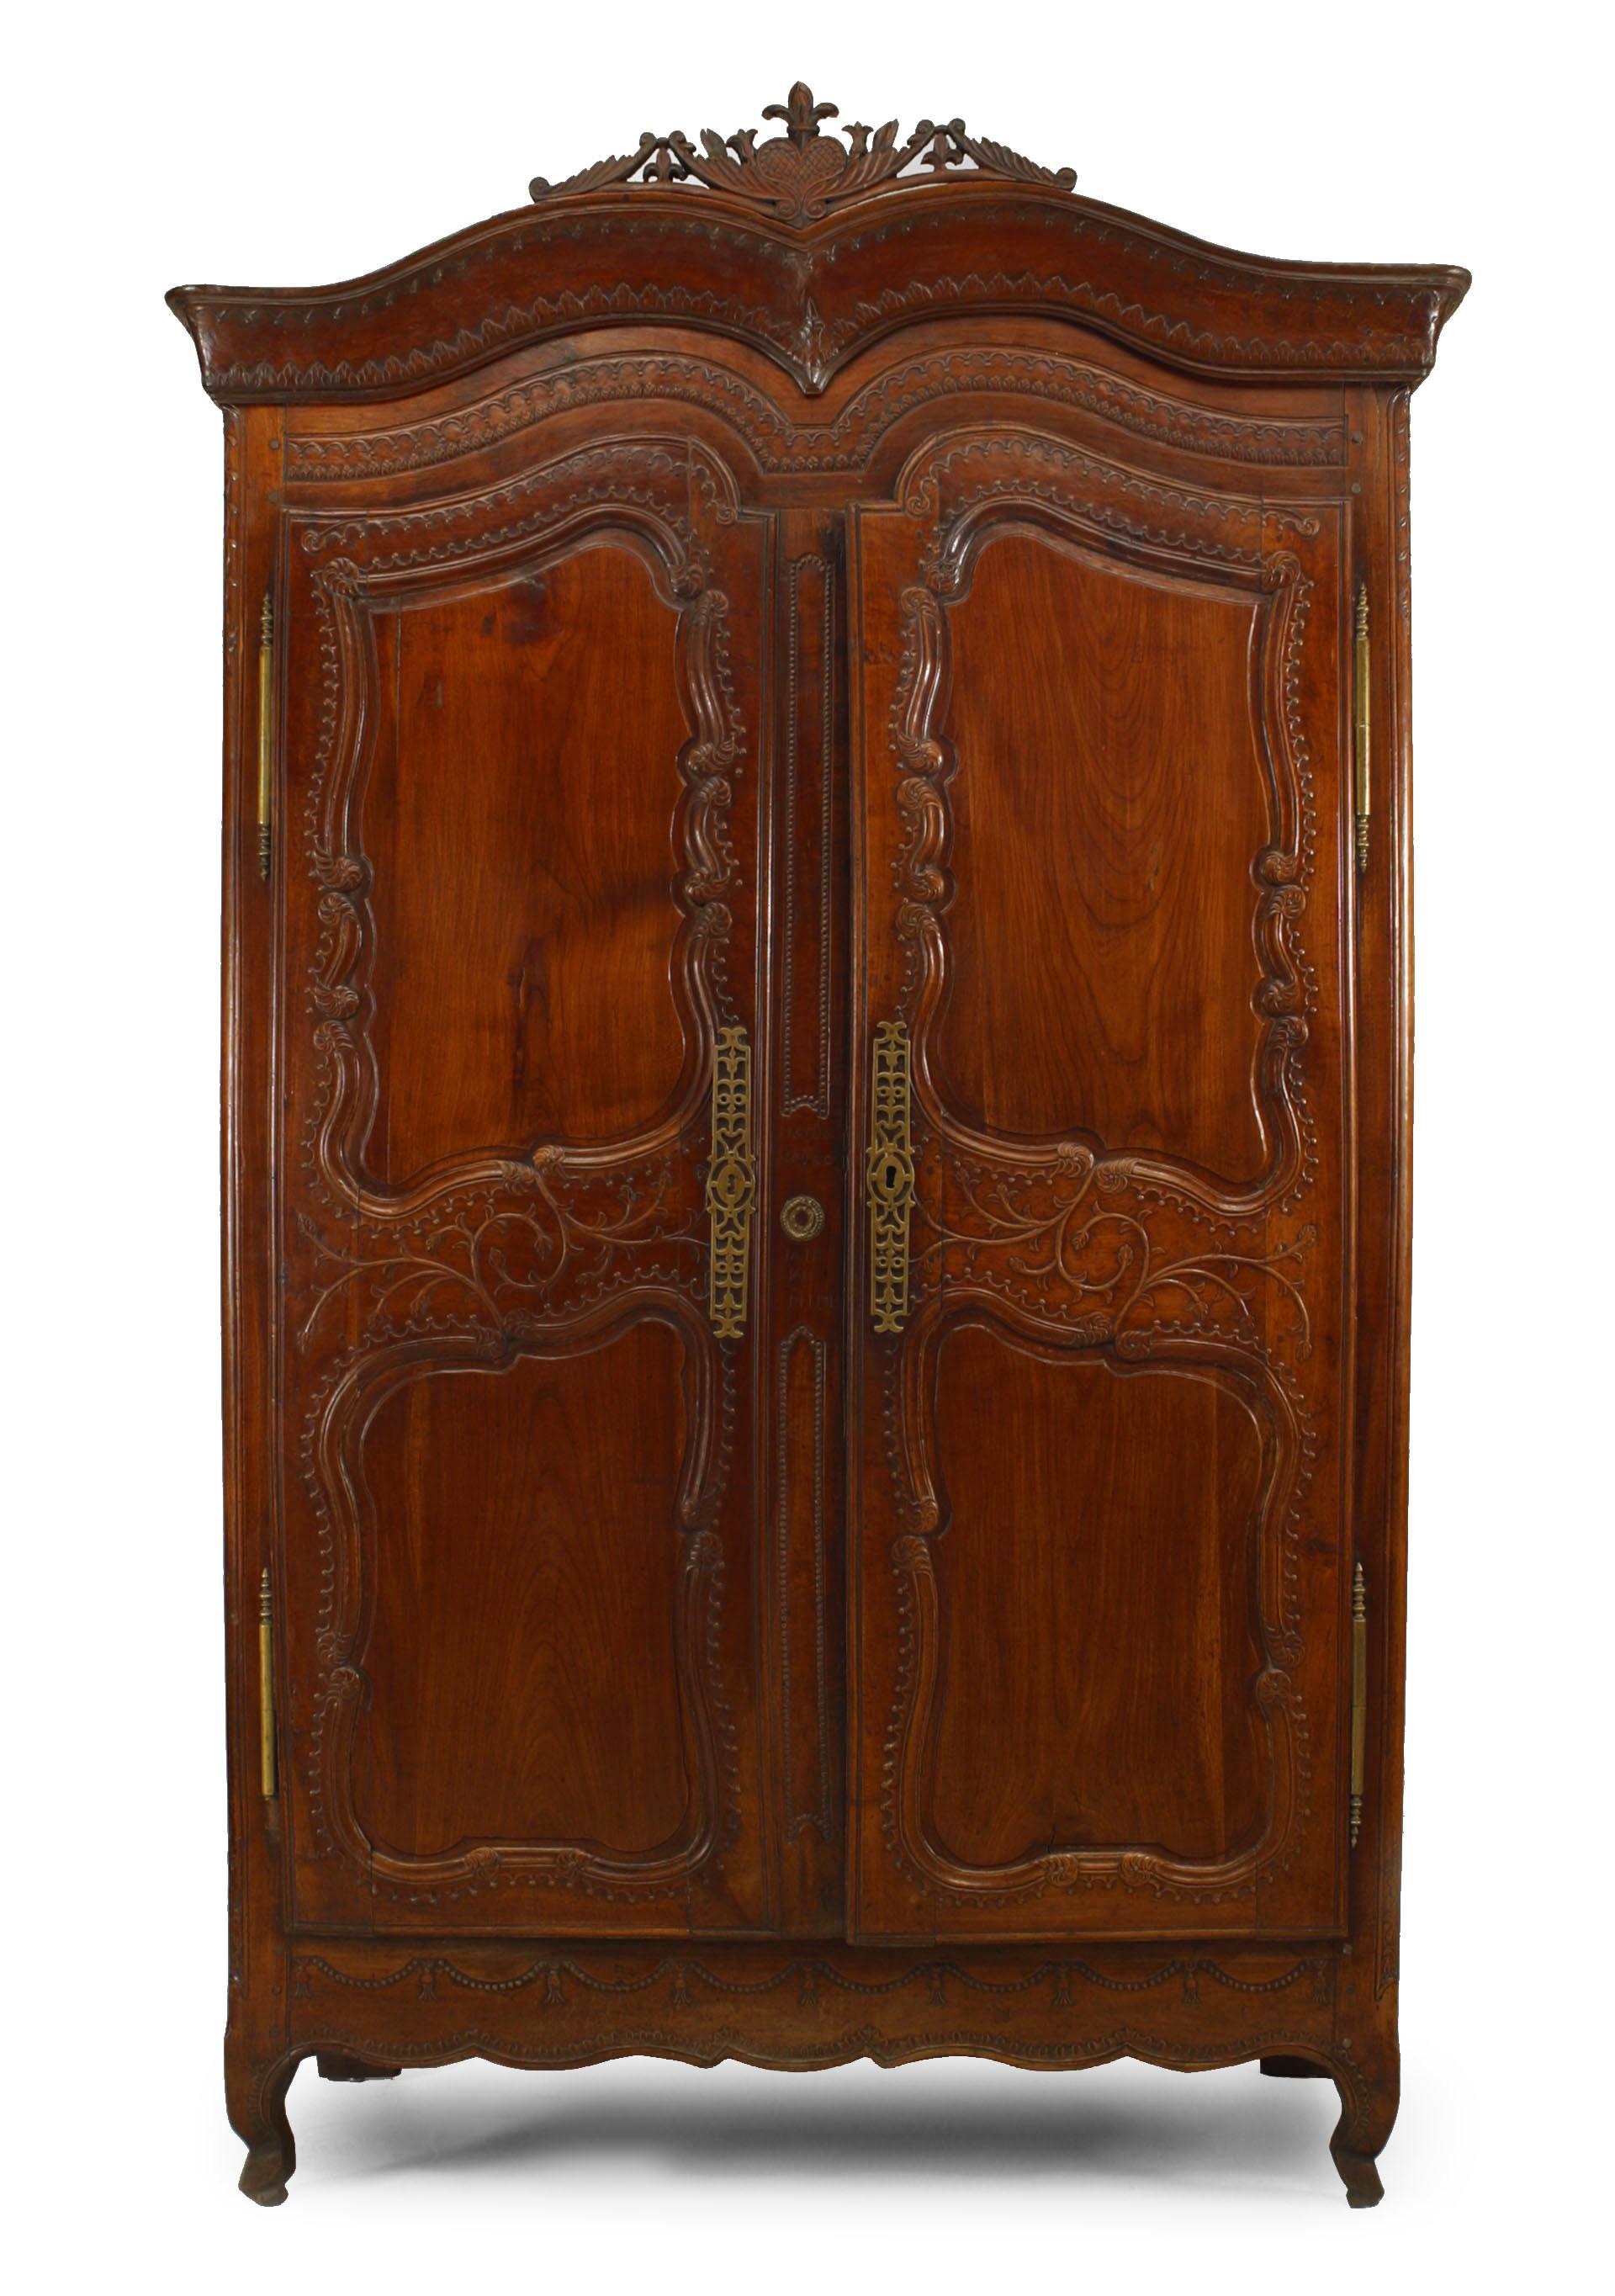 French Provincial 18th century walnut carved armoire with double scroll top and 2 doors with carved border.